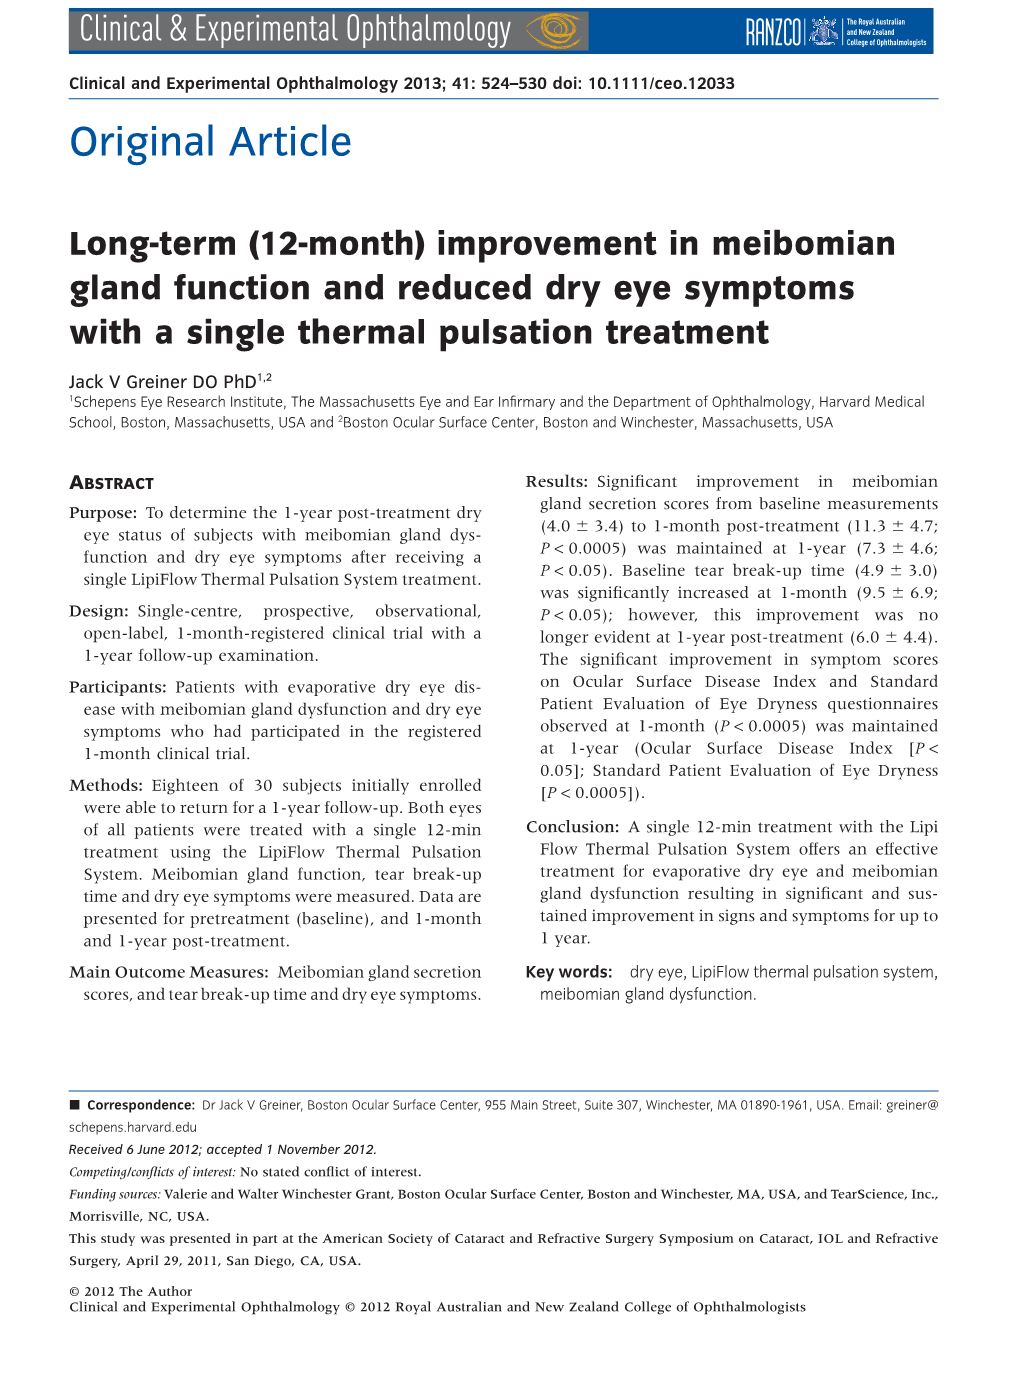 Improvement in Meibomian Gland Function and Reduced Dry Eye Symptoms with a Single Thermal Pulsation Treatment